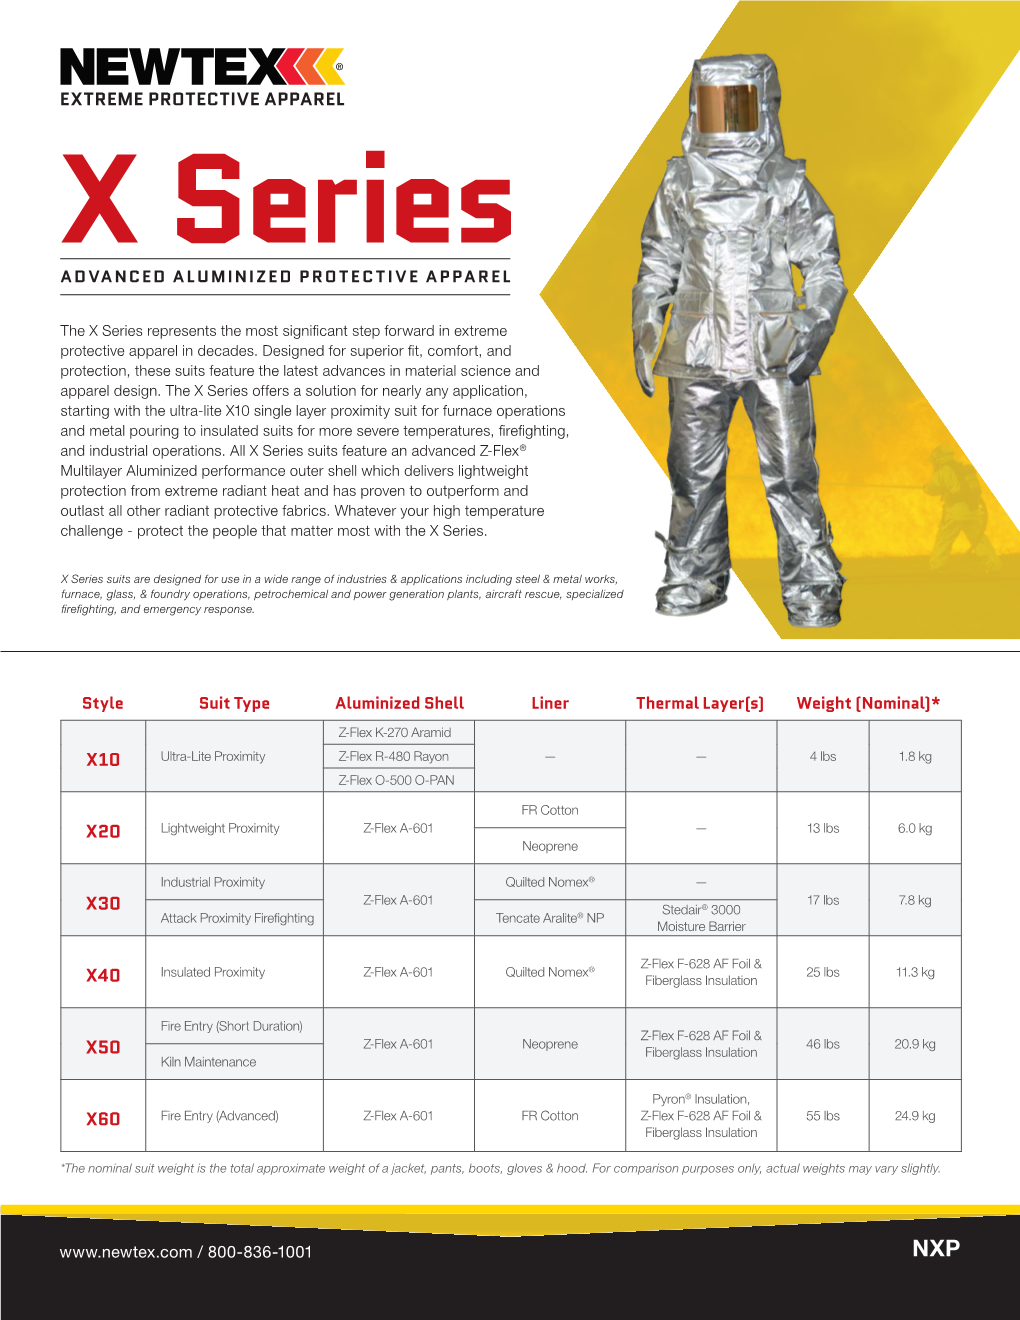 X Series Represents the Most Significant Step Forward in Extreme Protective Apparel in Decades